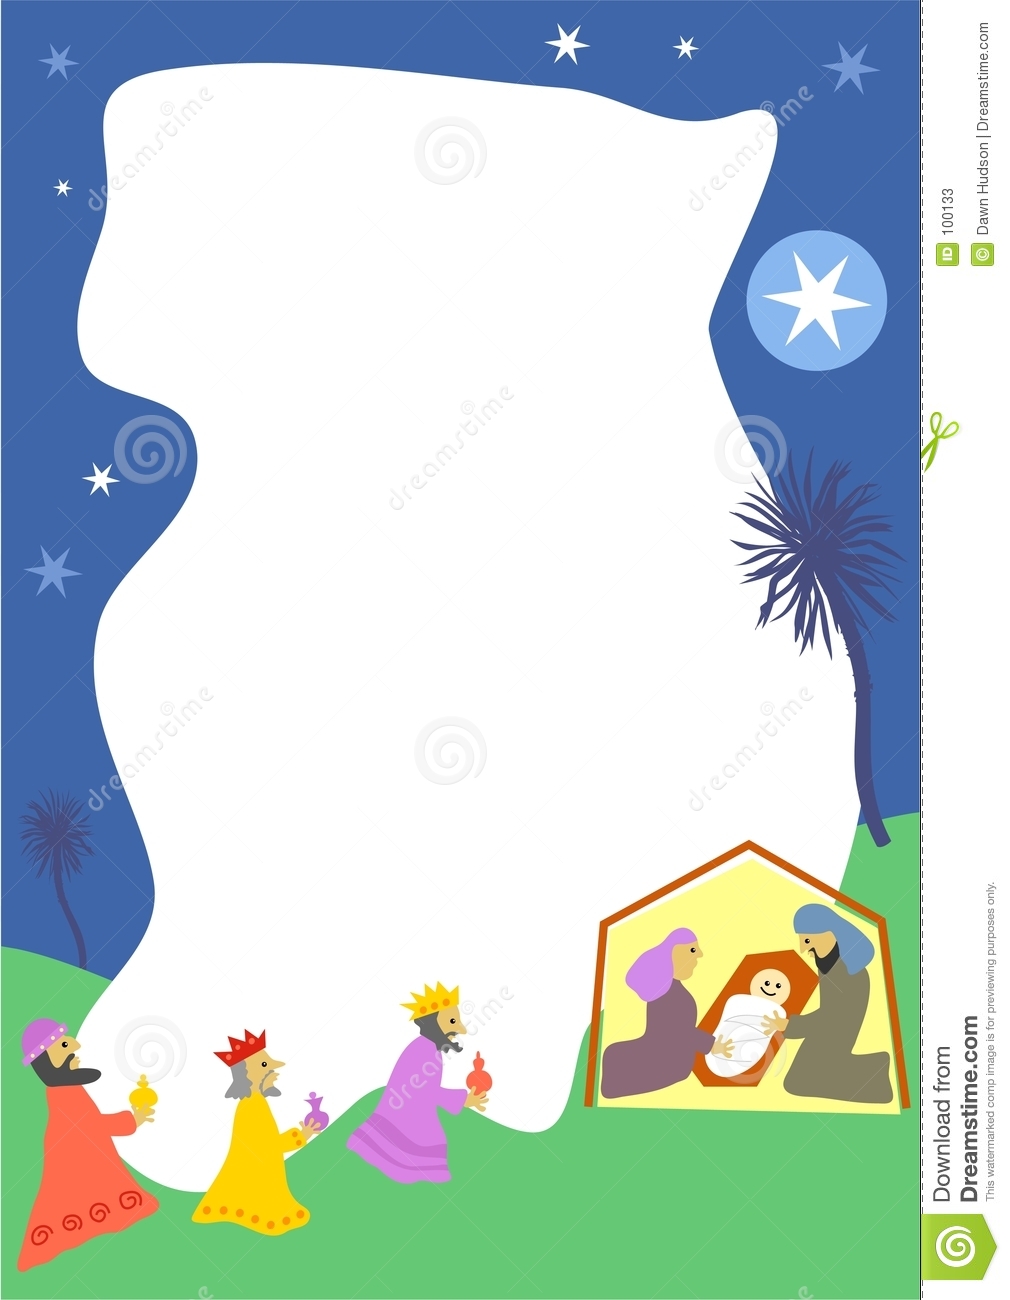 Religious christmas border clipart clipart images gallery